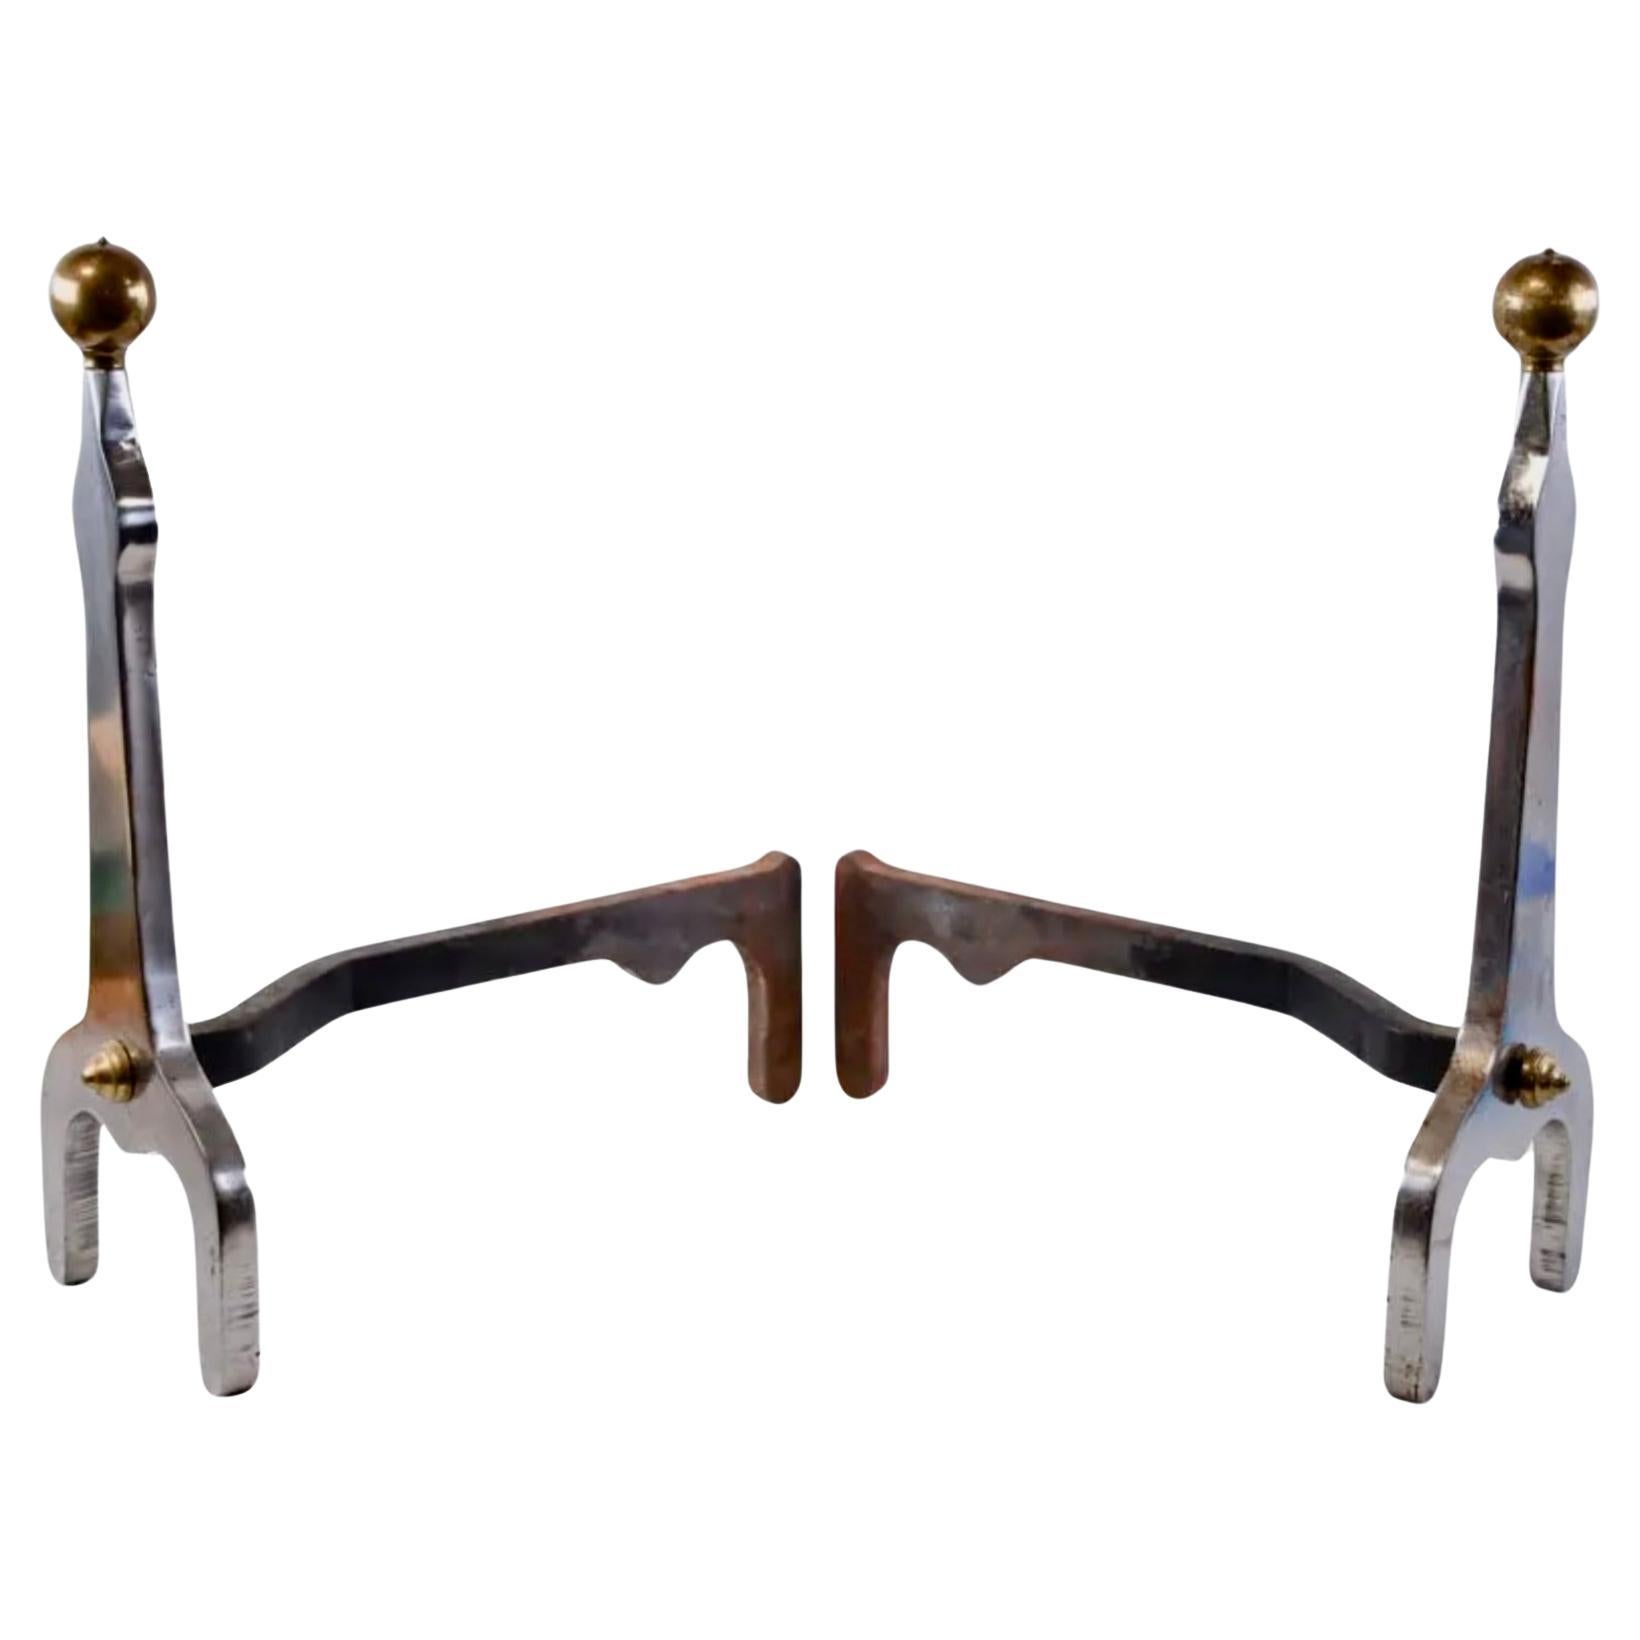 A very unusual pair of heavy polished steel andirons with brass ball tops and brass finials attaching the substantial wrought iron billet bars to the fronts. The design is spare and elegant, loosely based on English polished steel Arts and Crafts